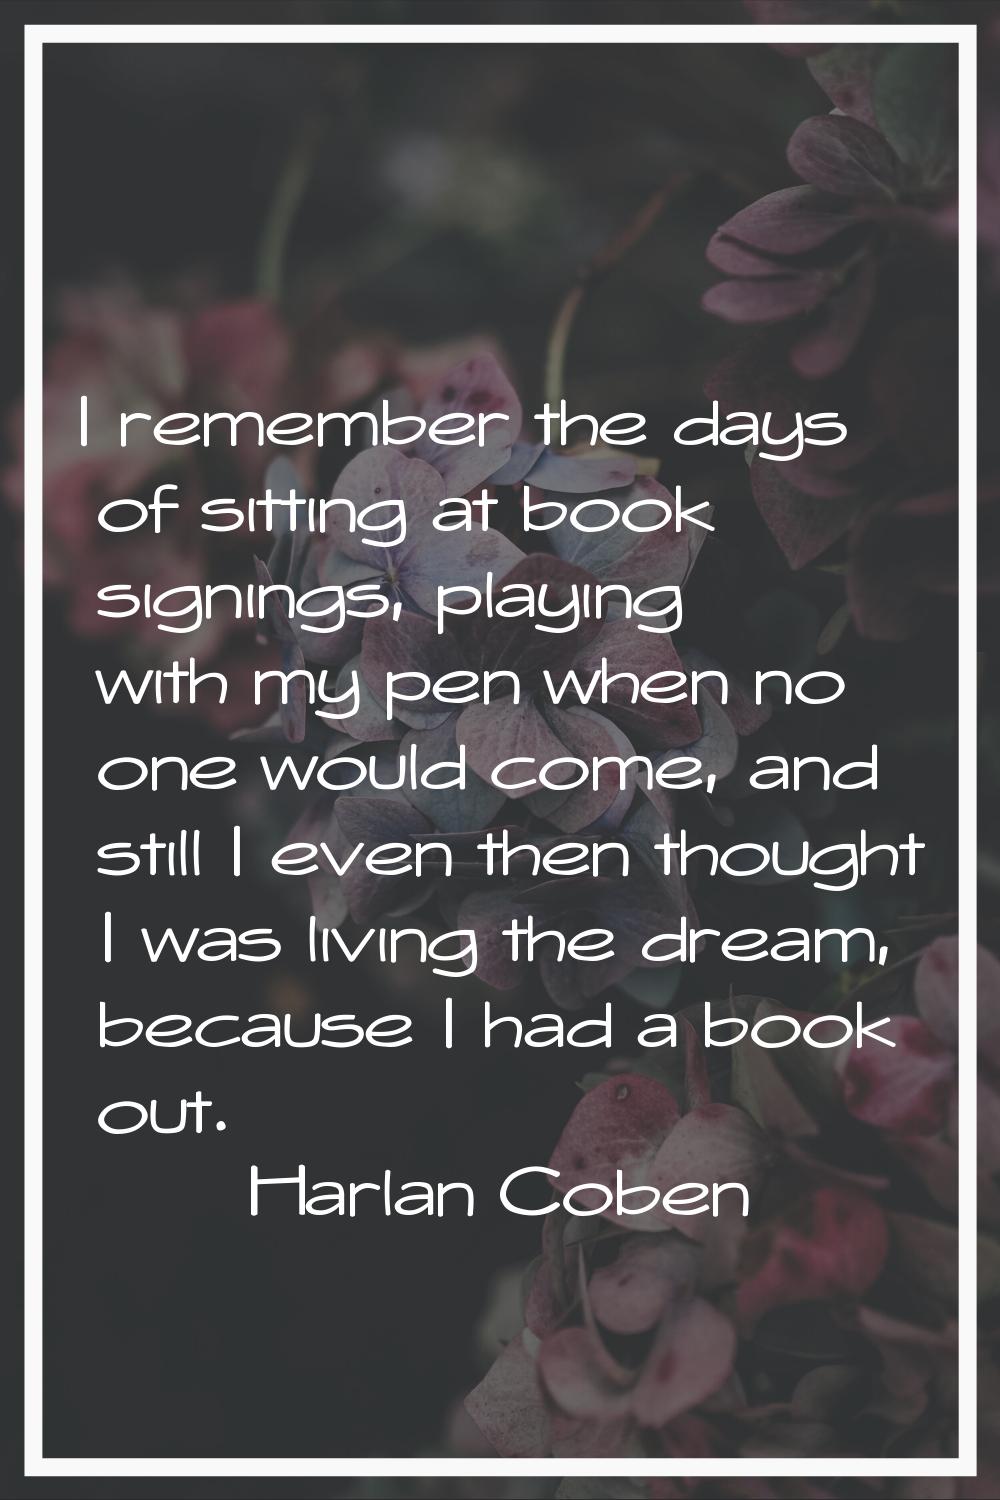 I remember the days of sitting at book signings, playing with my pen when no one would come, and st